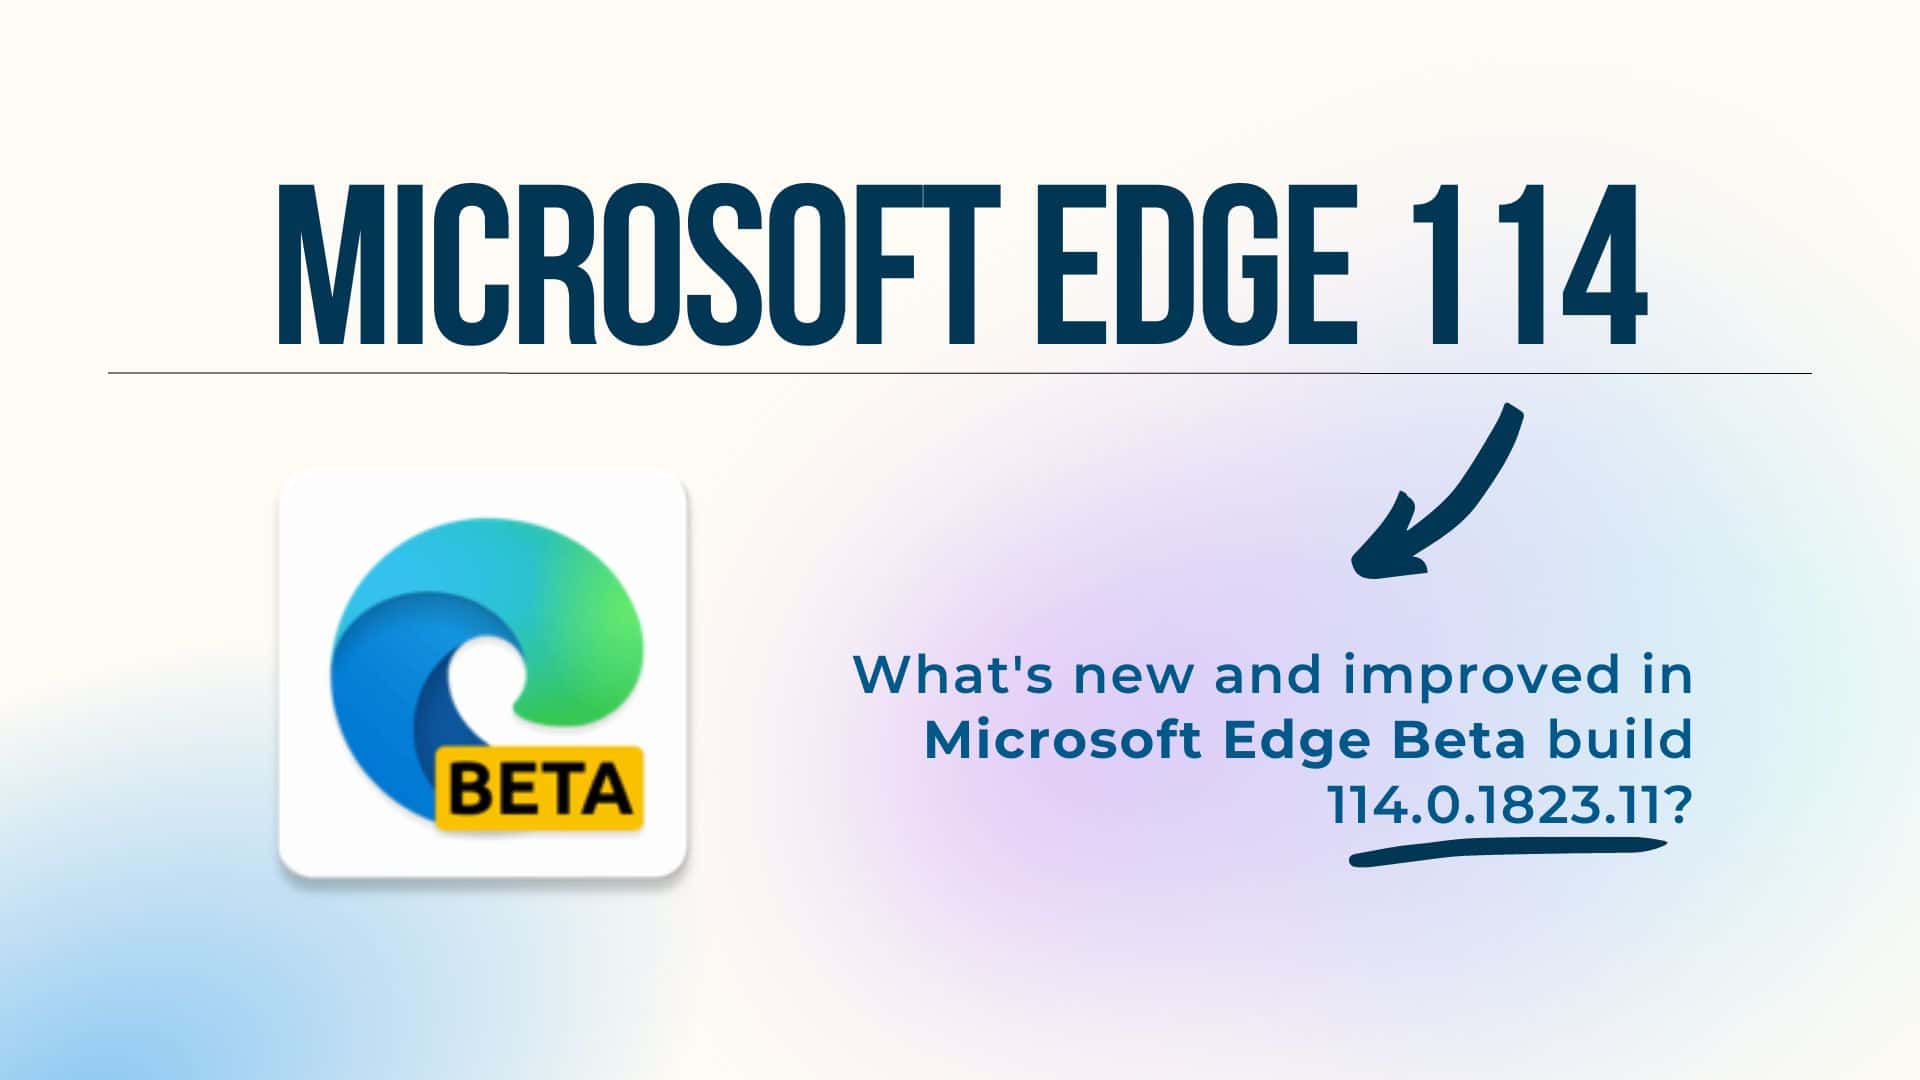 What's new and improved in Microsoft Edge Beta Build 114.0.1823.11?